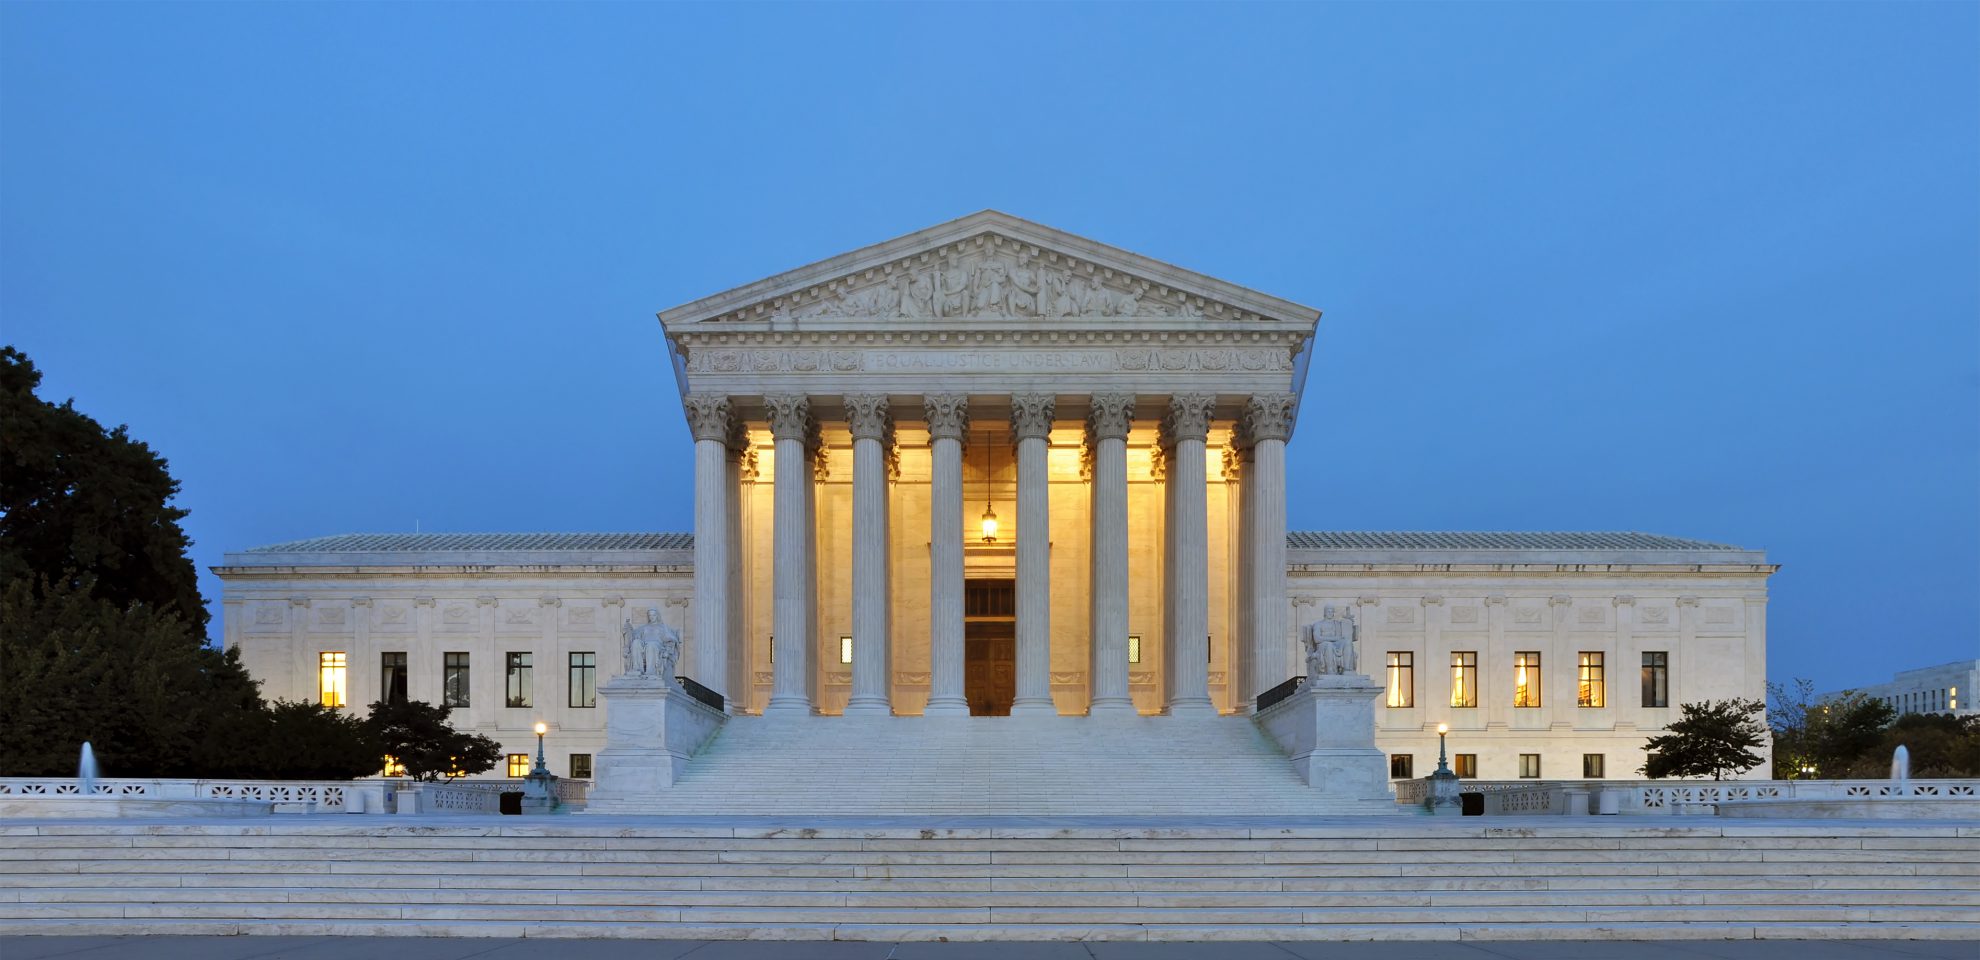 VICTORY FOR PRO LIFE SPEECH AT THE U.S. SUPREME COURT